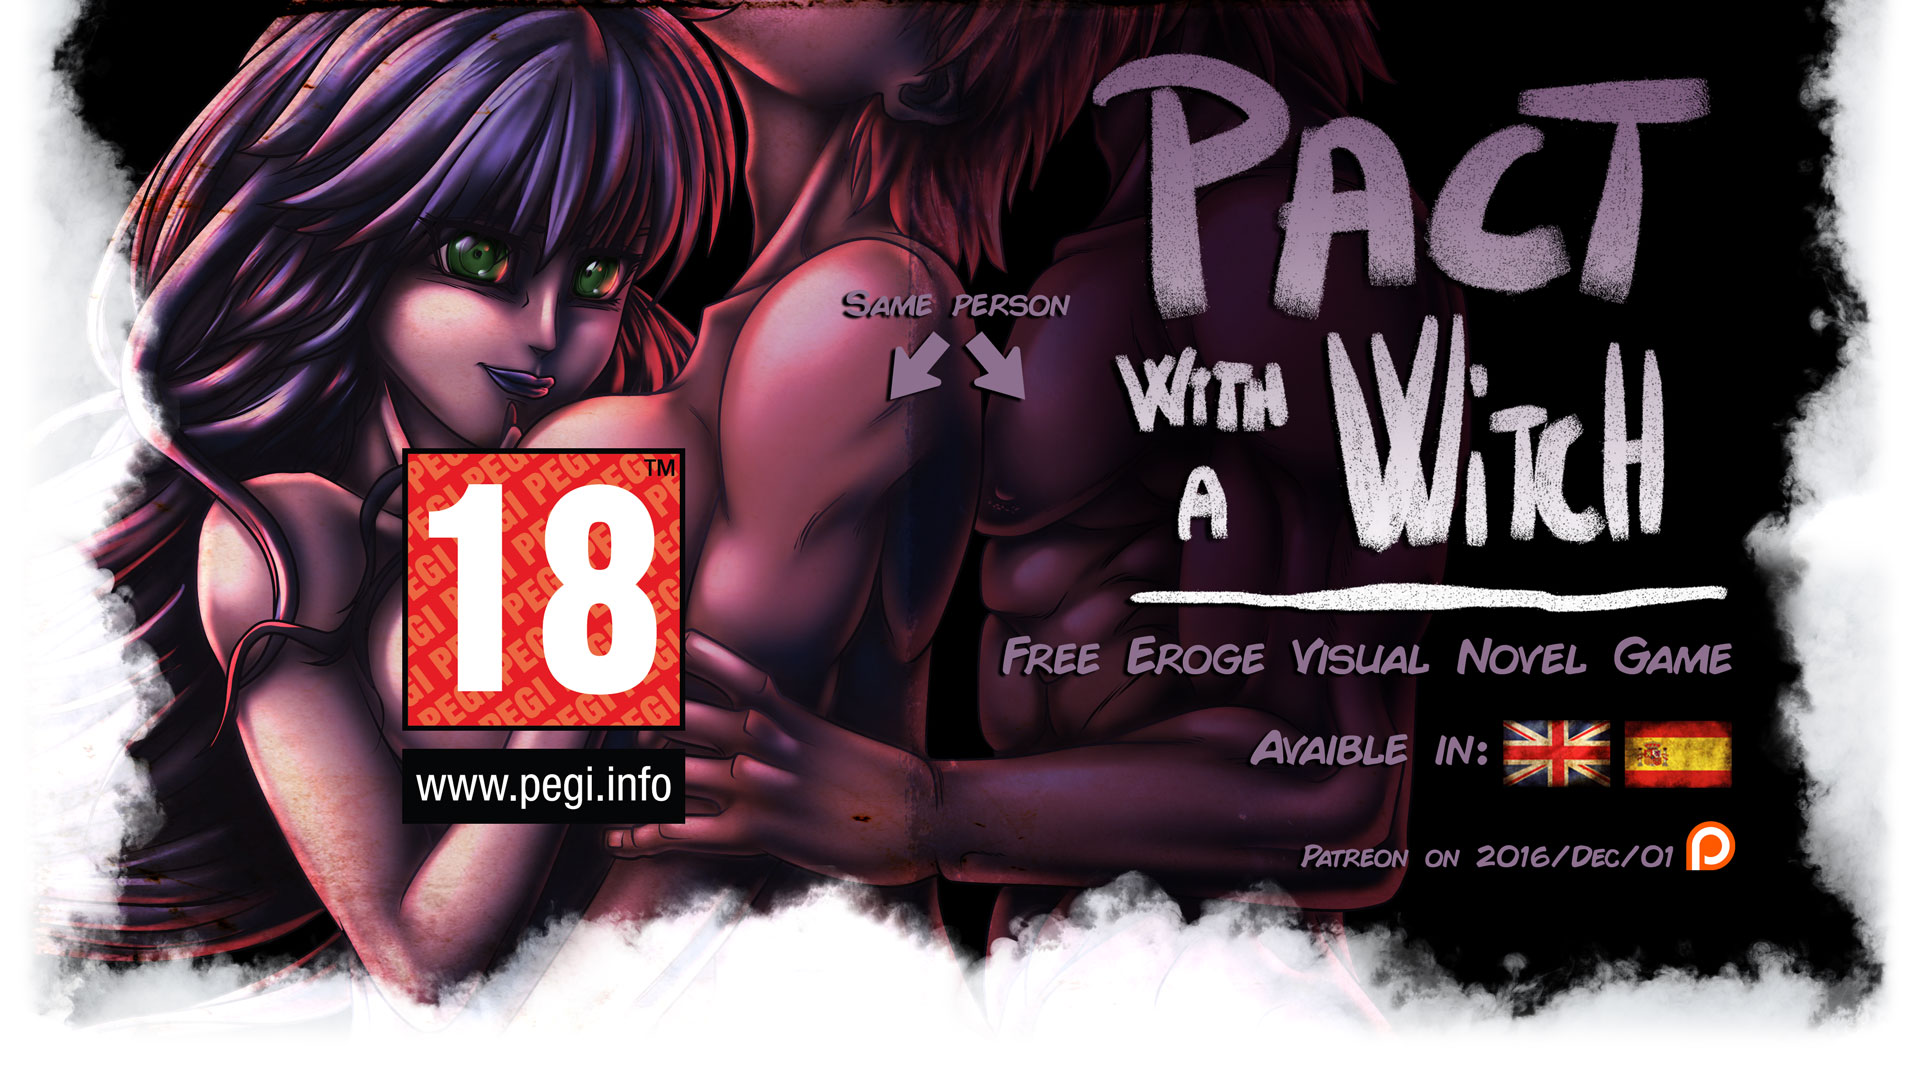 Pact with a Witch (Hentai XXX, NSFW, +18)